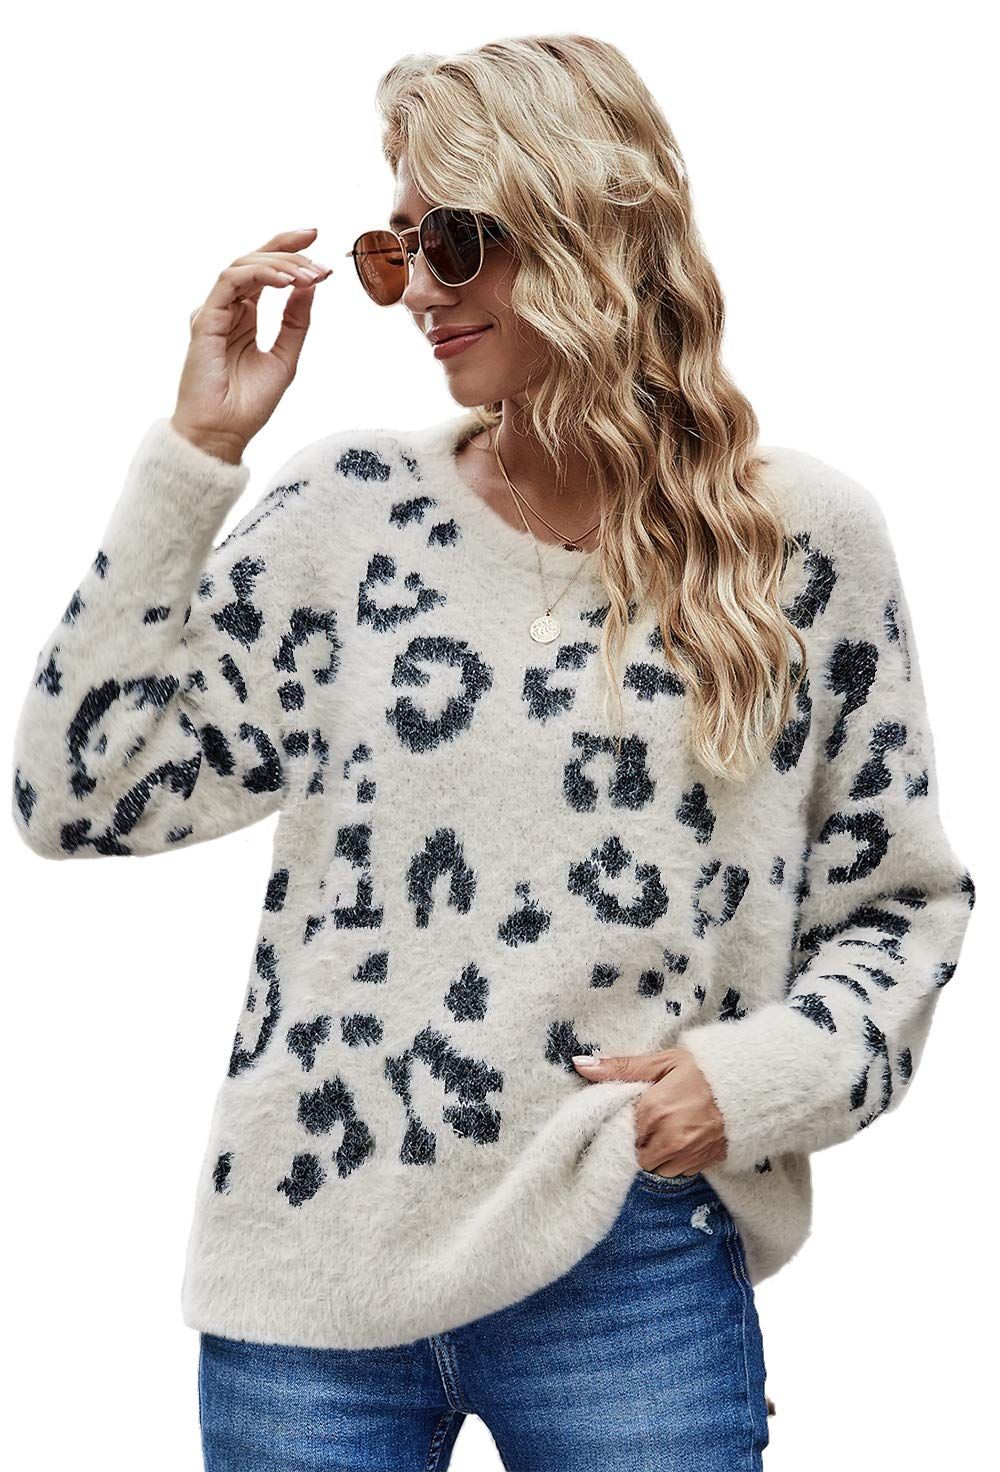 HZSONNE Women's Casual Leopard Crew Neck Loose Fit Sweater Long Sleeve Slouchy Pullover Knitted Fuzz | Amazon (US)